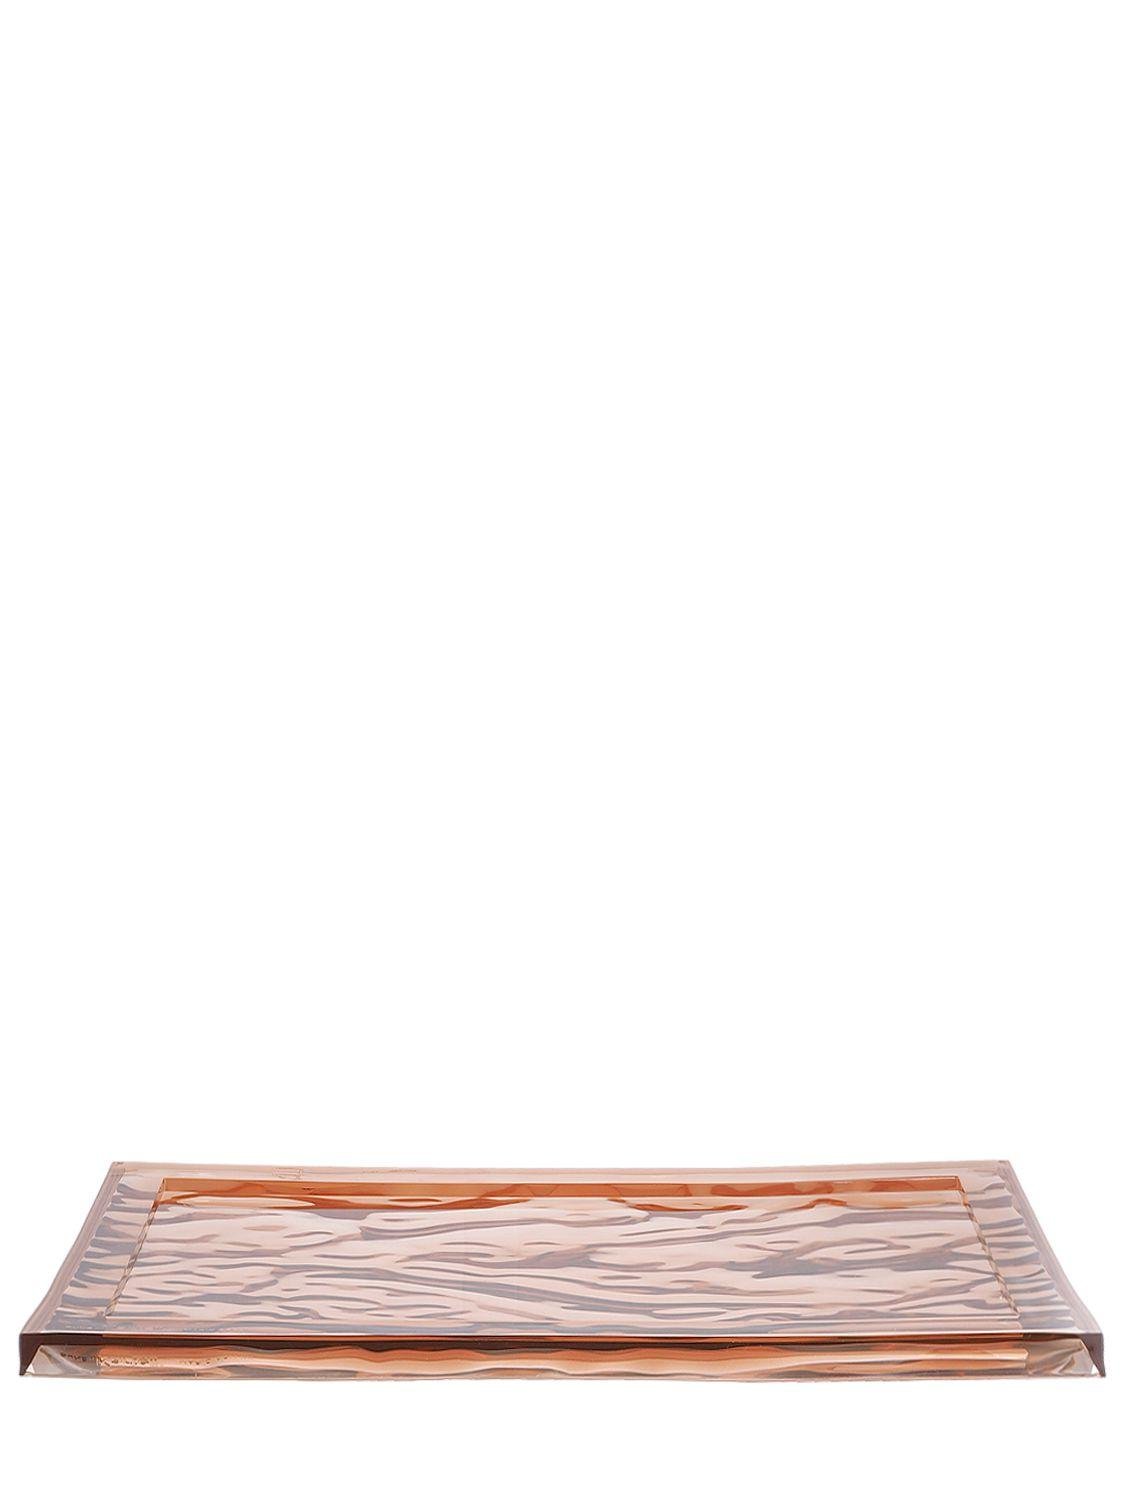 Dune Tray by KARTELL